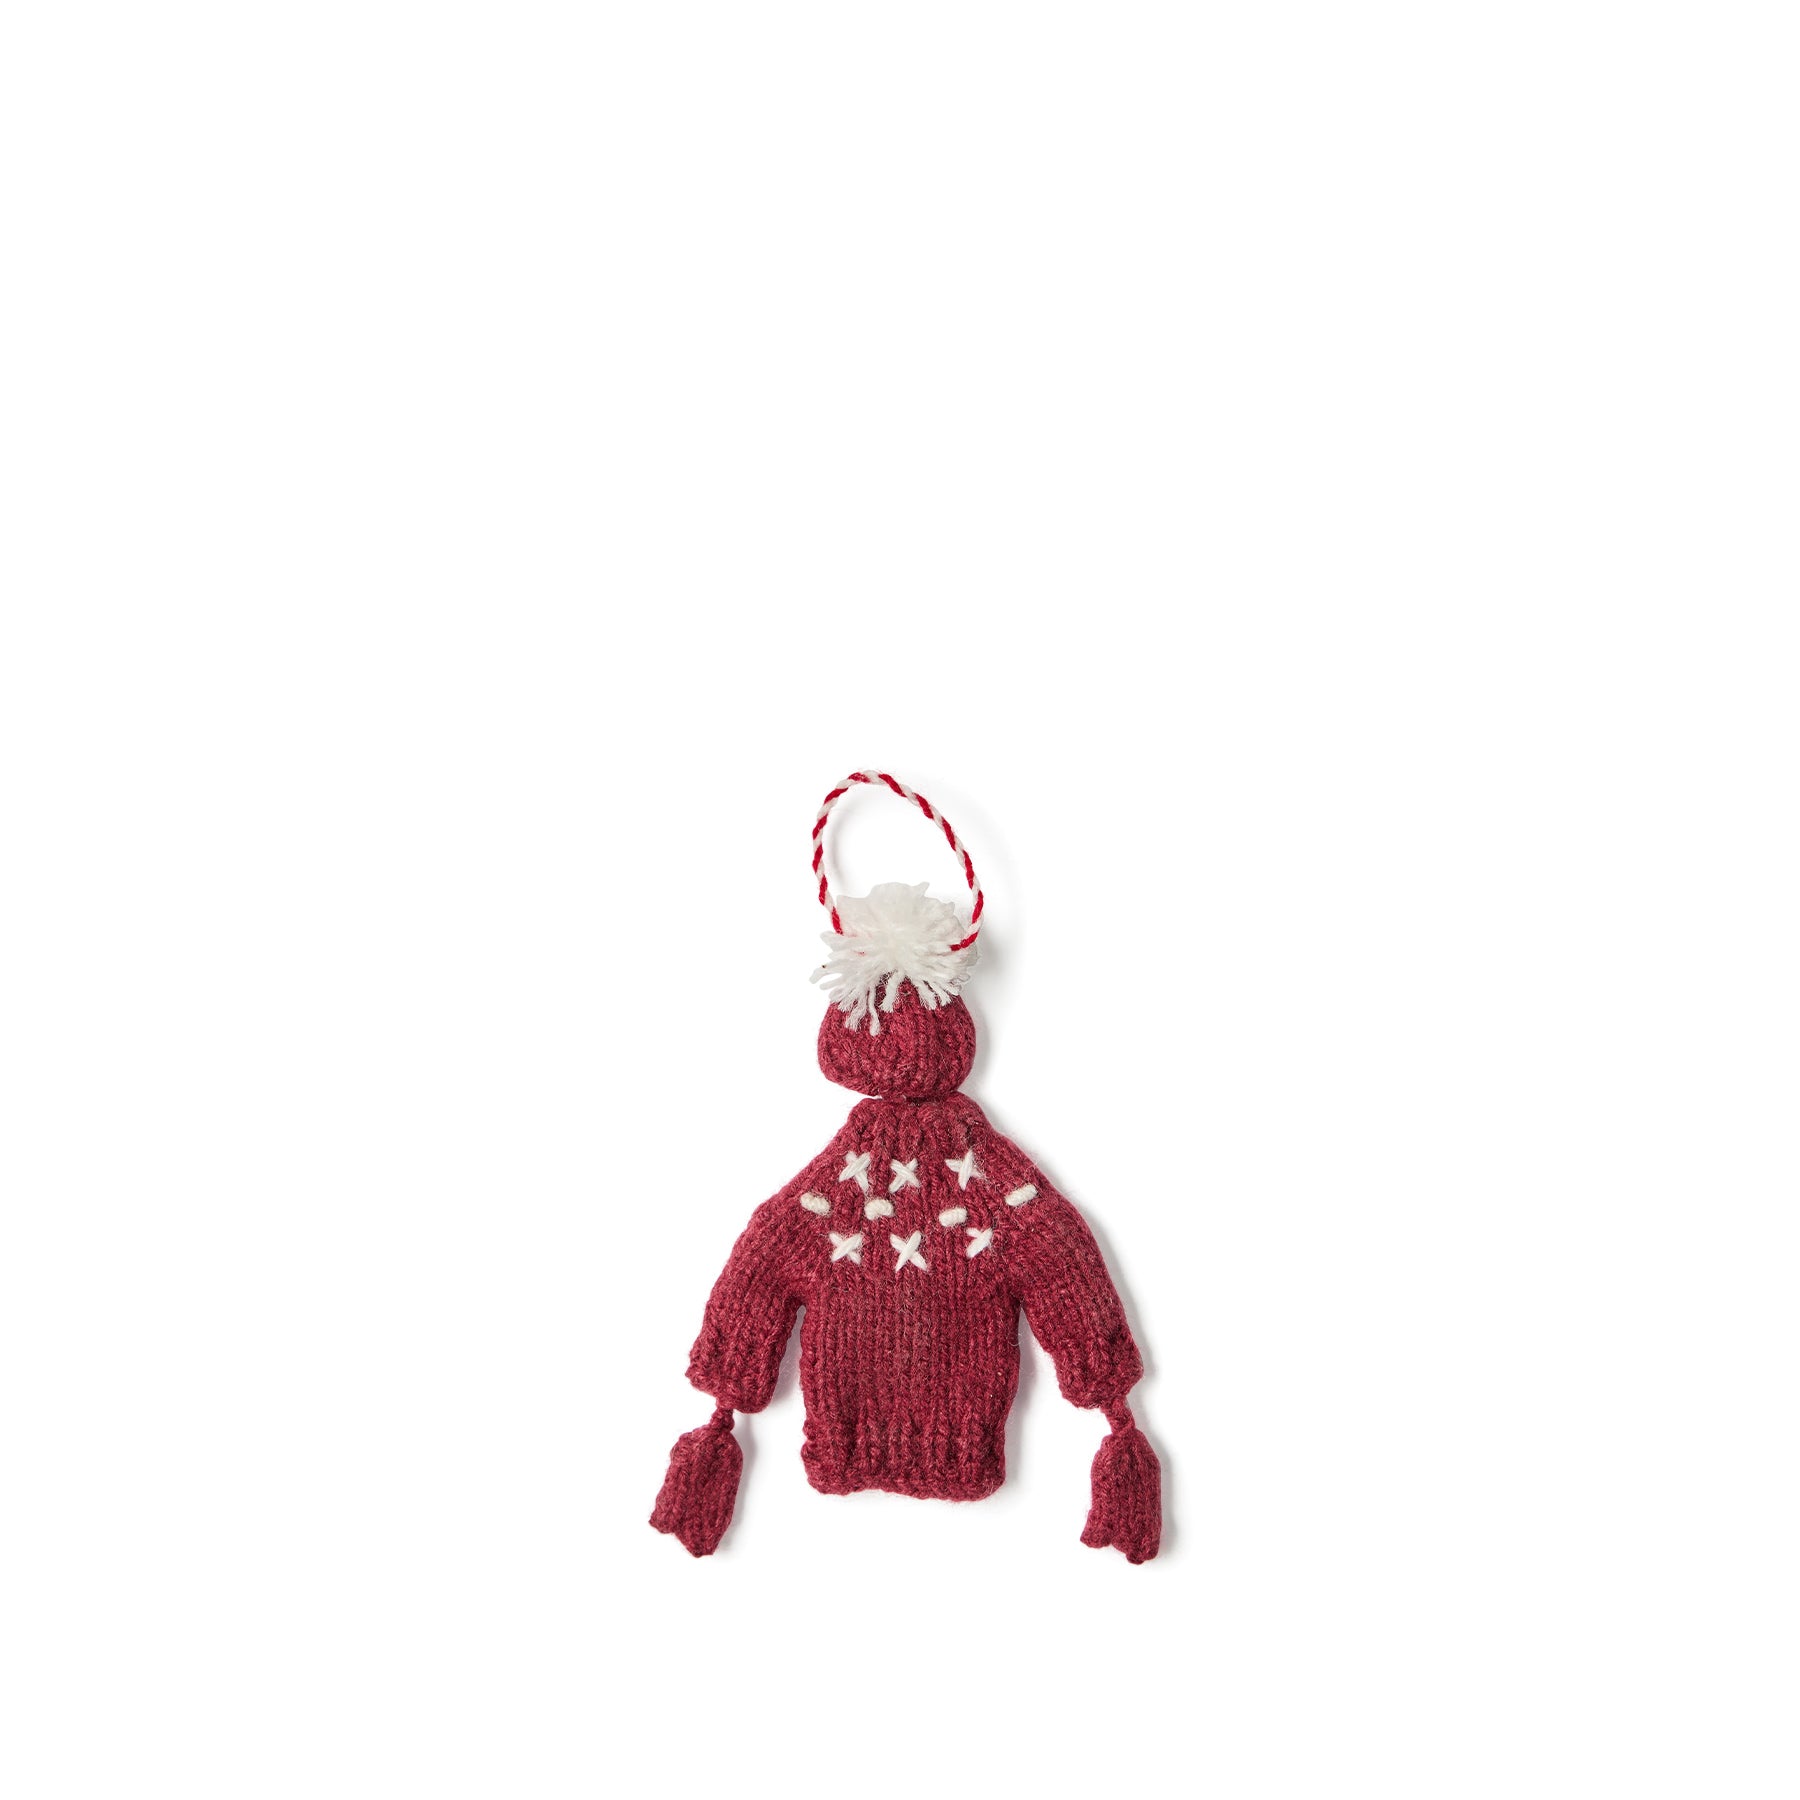 Holiday Sweater Ornament in Burgundy Zoom Image 1